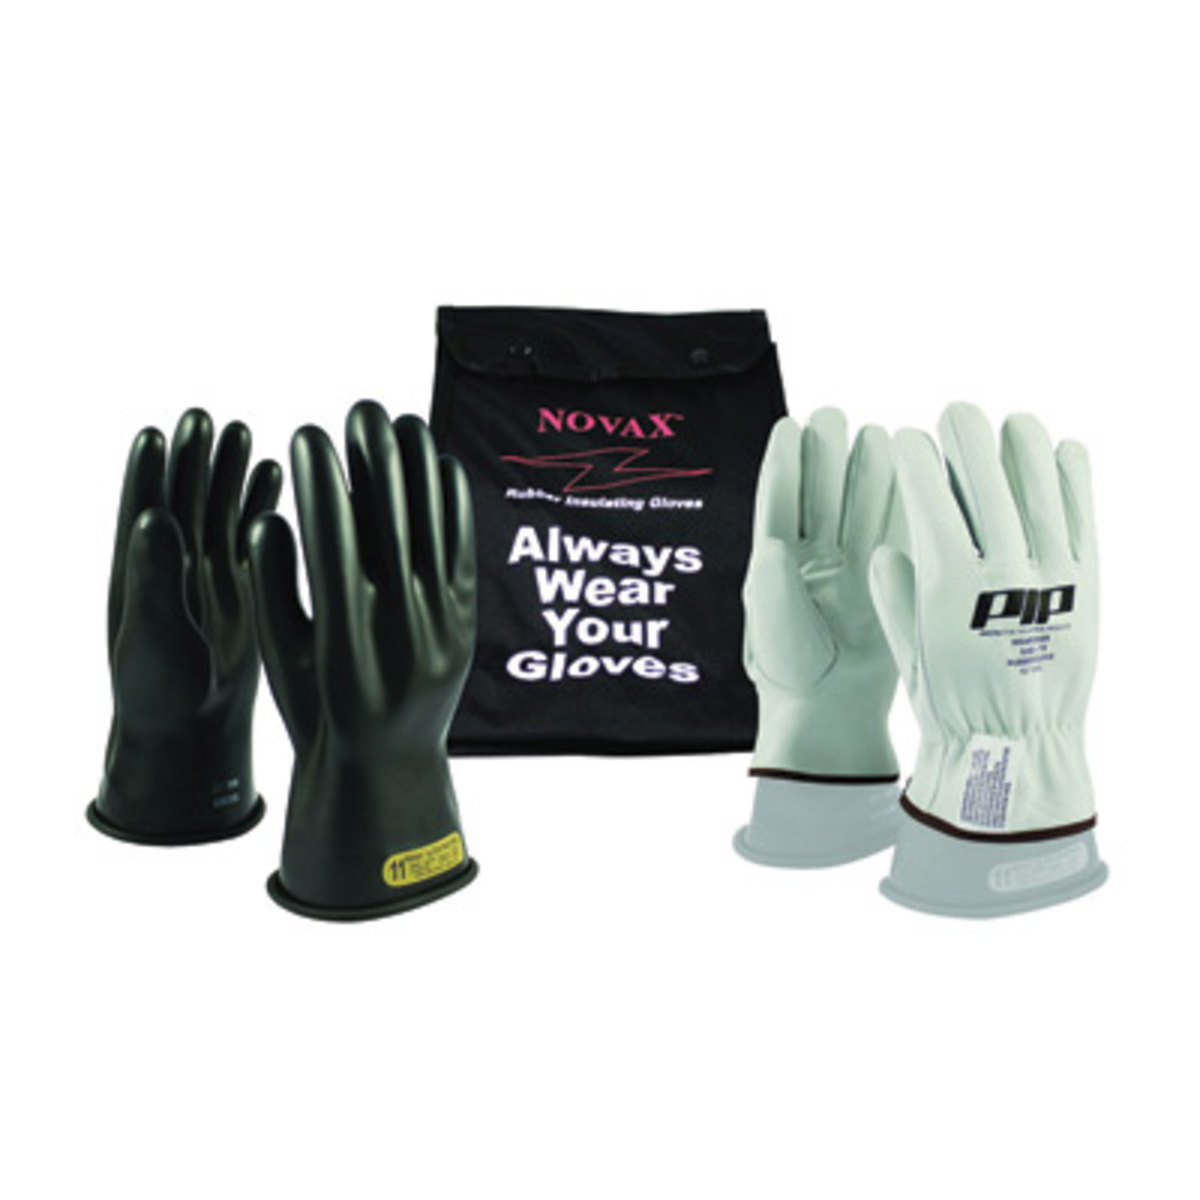 PIP® Size 10 Black Rubber Class 0 Electrical Safety Linesmen's Gloves Kit With Rolled Cuff (Includes 150-0-11 NOVAX® Insulating